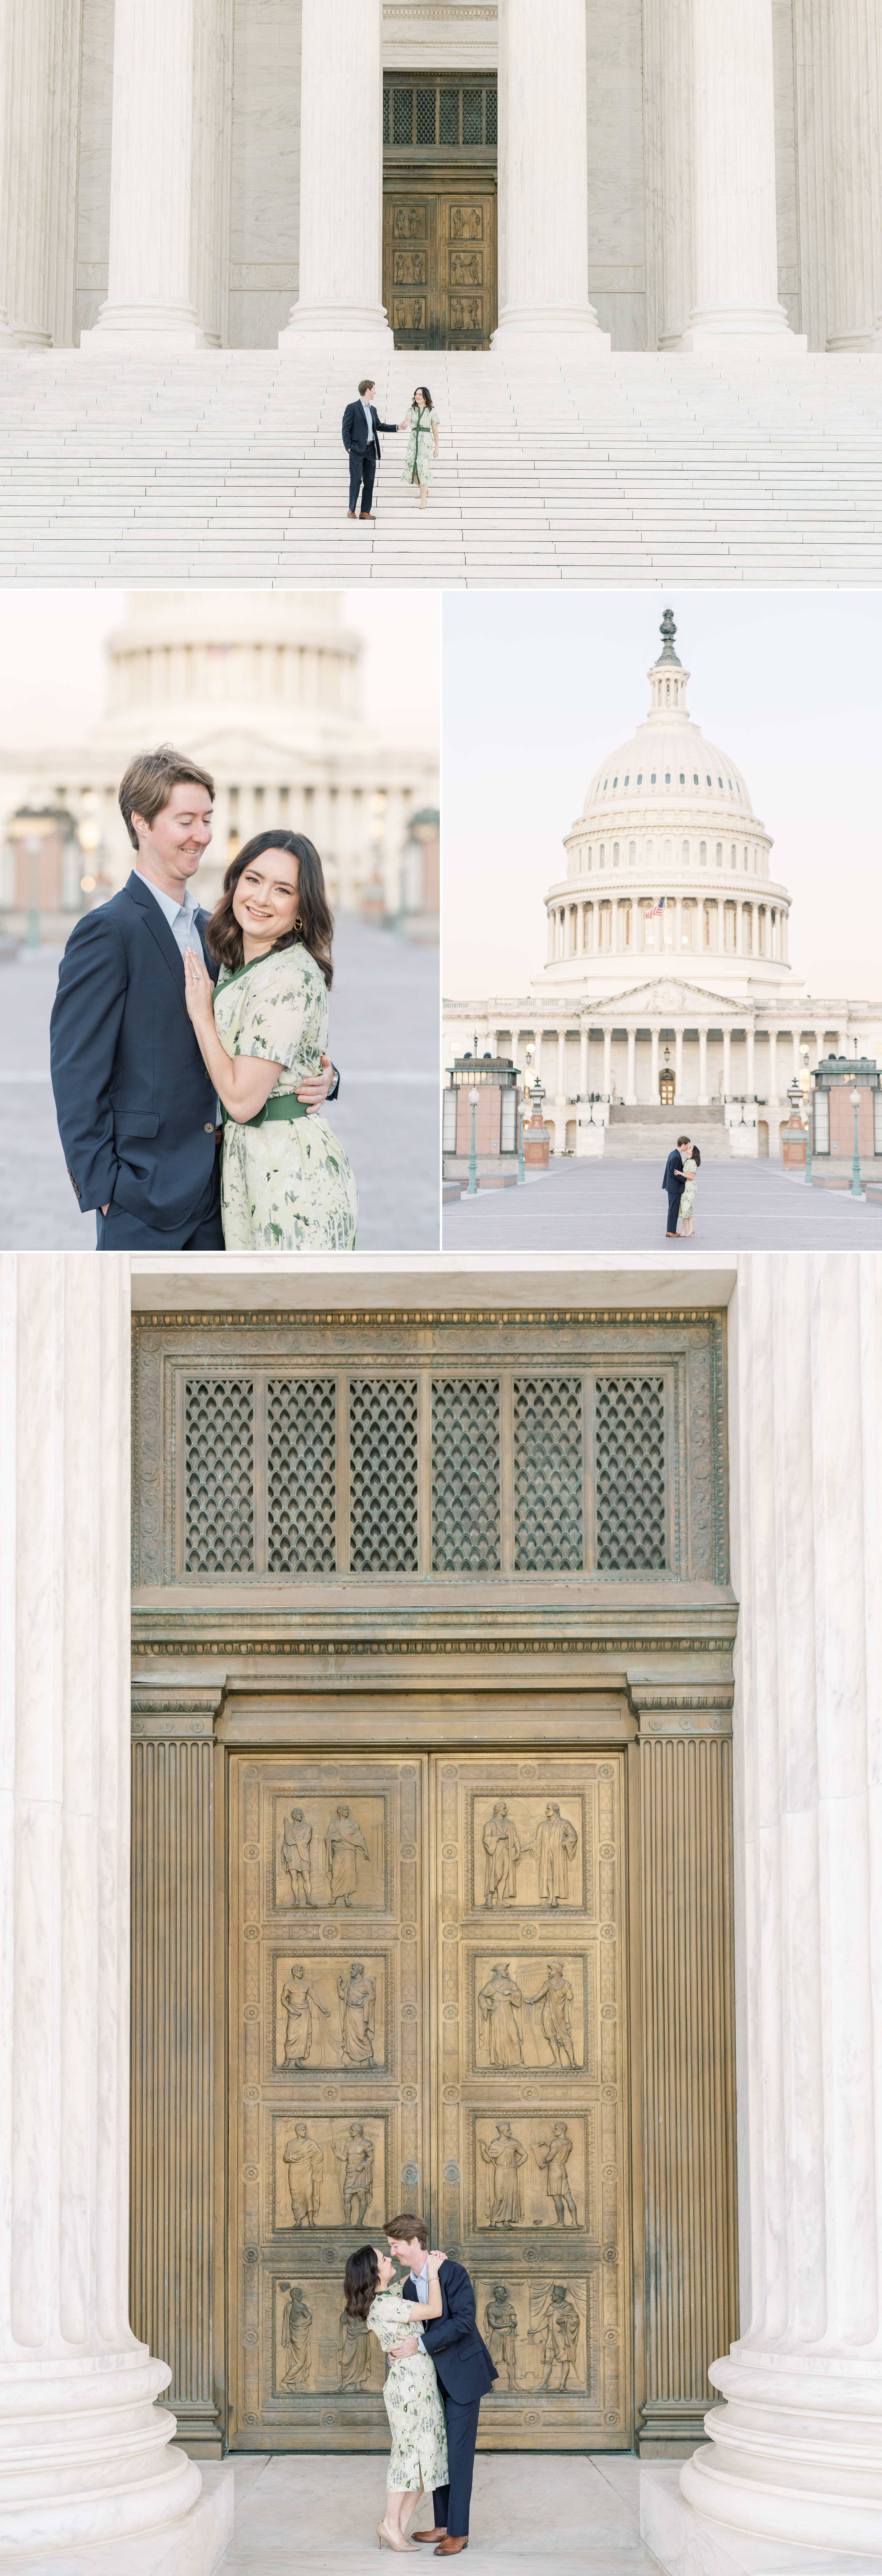 A classic engagement session at the US Capitol & Supreme Court in Washington, DC.